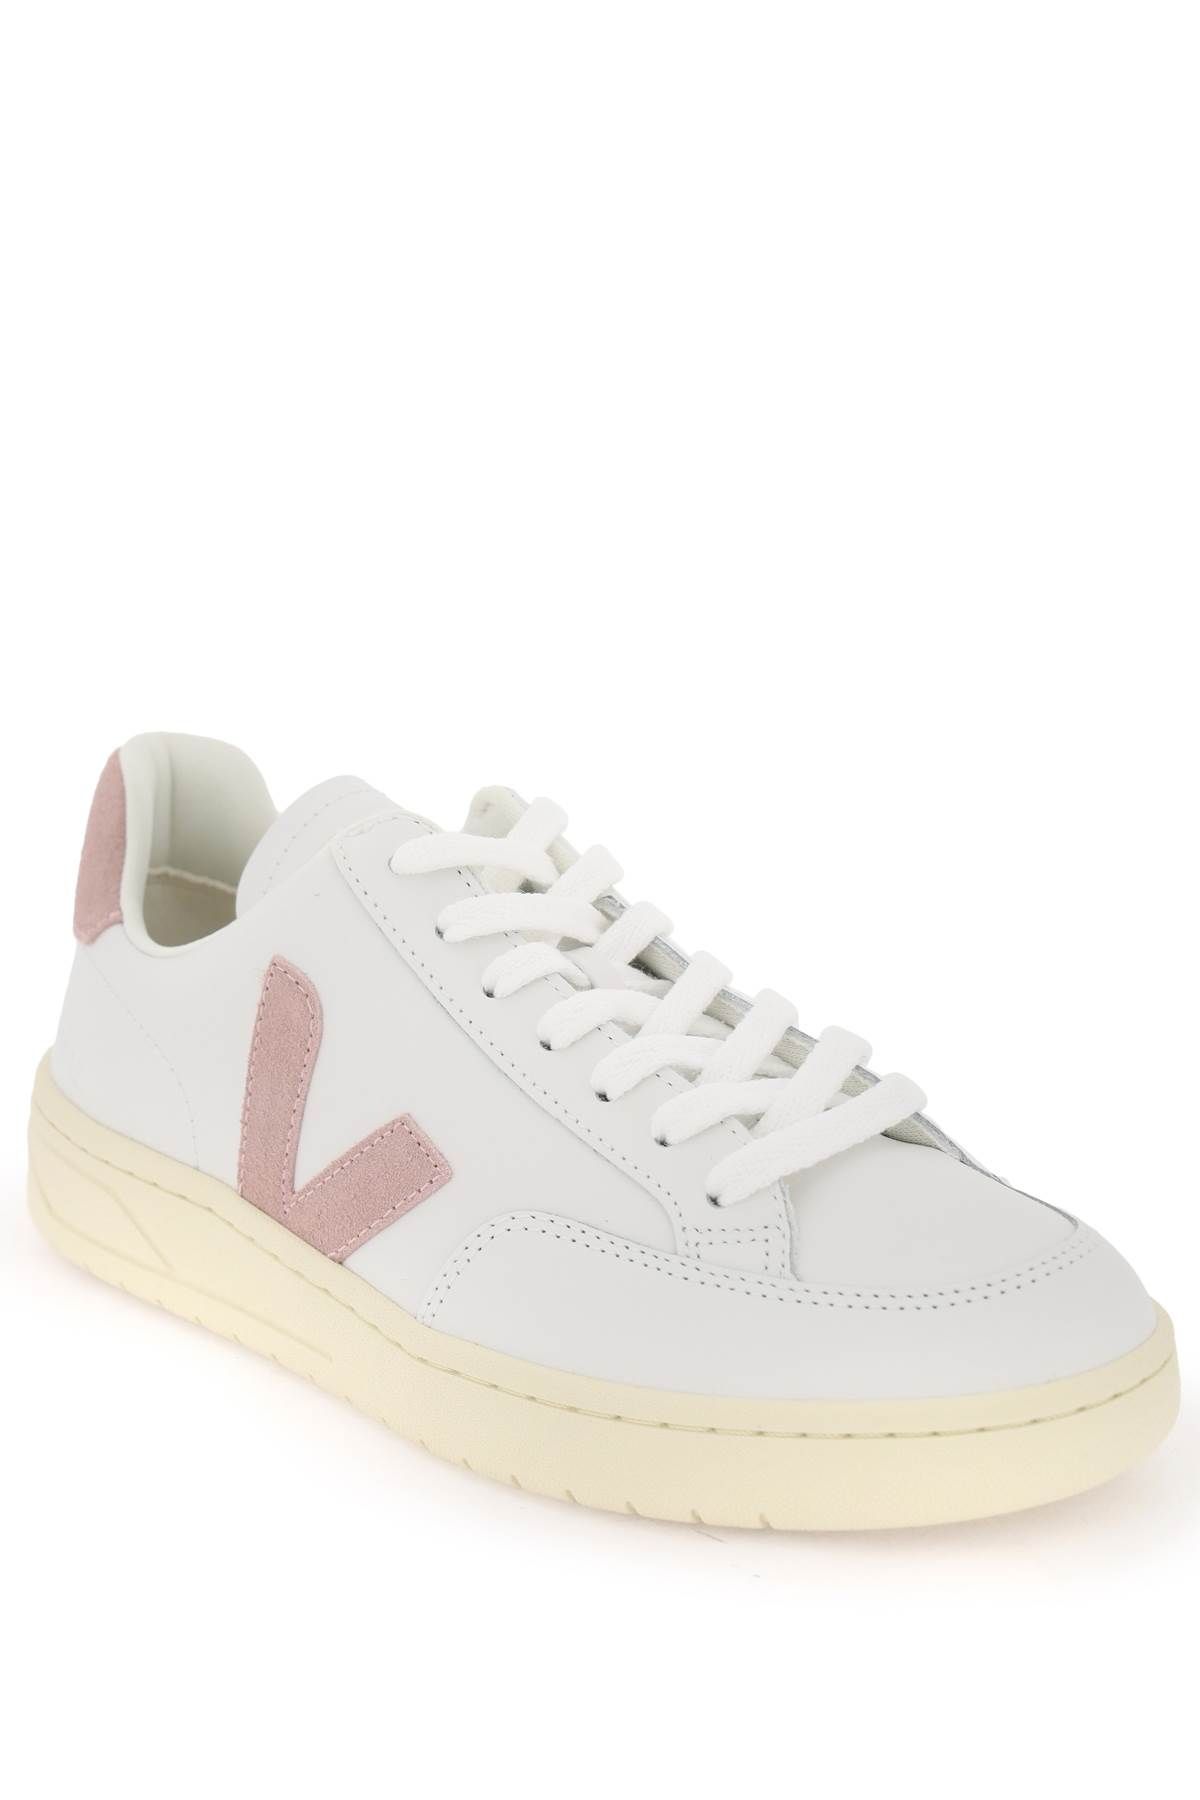 Shop Veja Leather V-12 Sneakers In White,pink